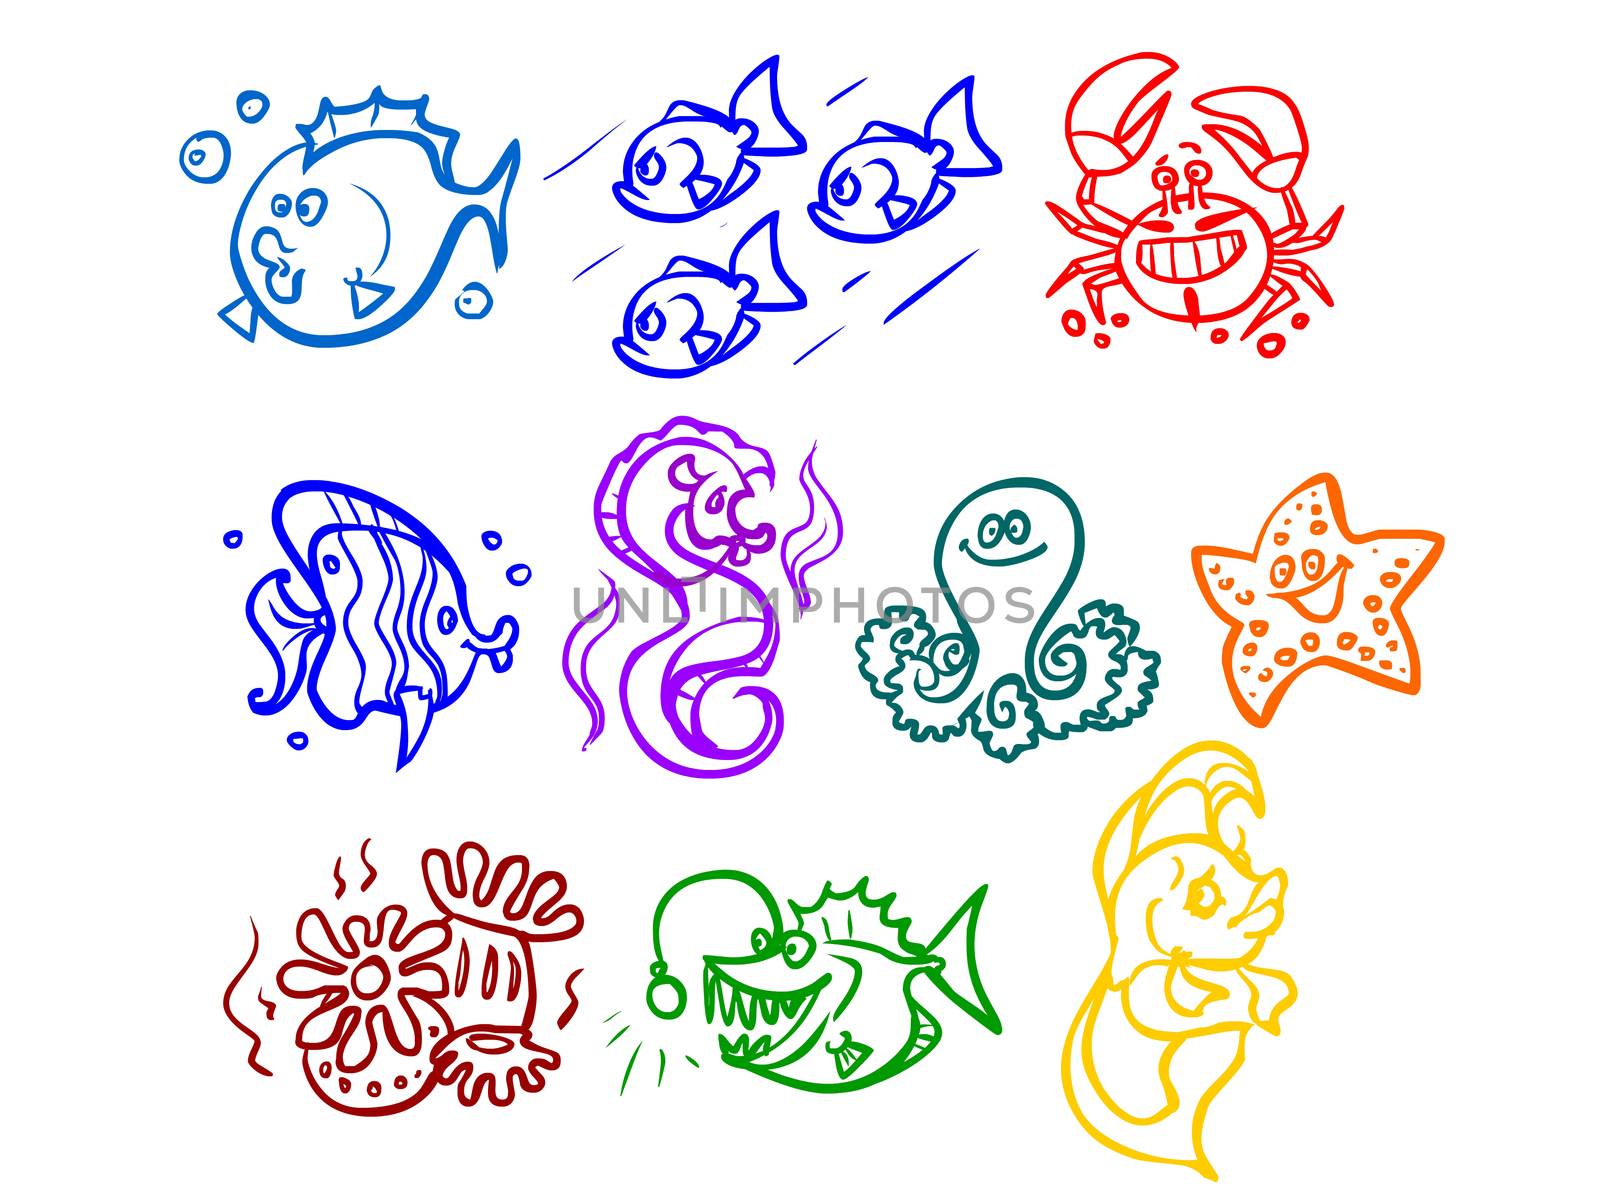 Cartoon illustration of marine life. Fish, seaweed, octopus, crab, sea monster. Outline drawing on a white background